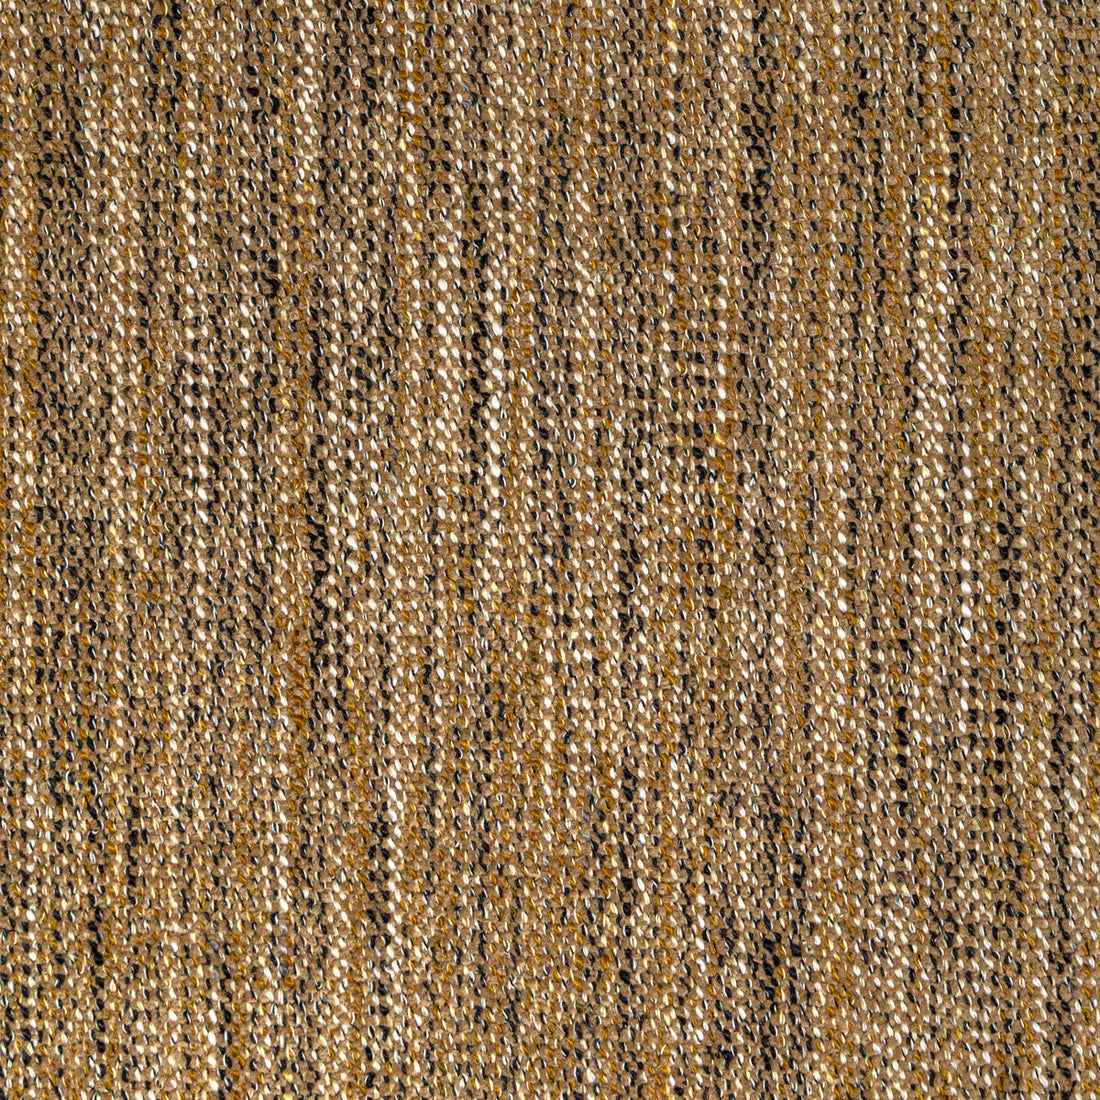 Delfino fabric in amber color - pattern 36748.6.0 - by Kravet Contract in the Refined Textures Performance Crypton collection